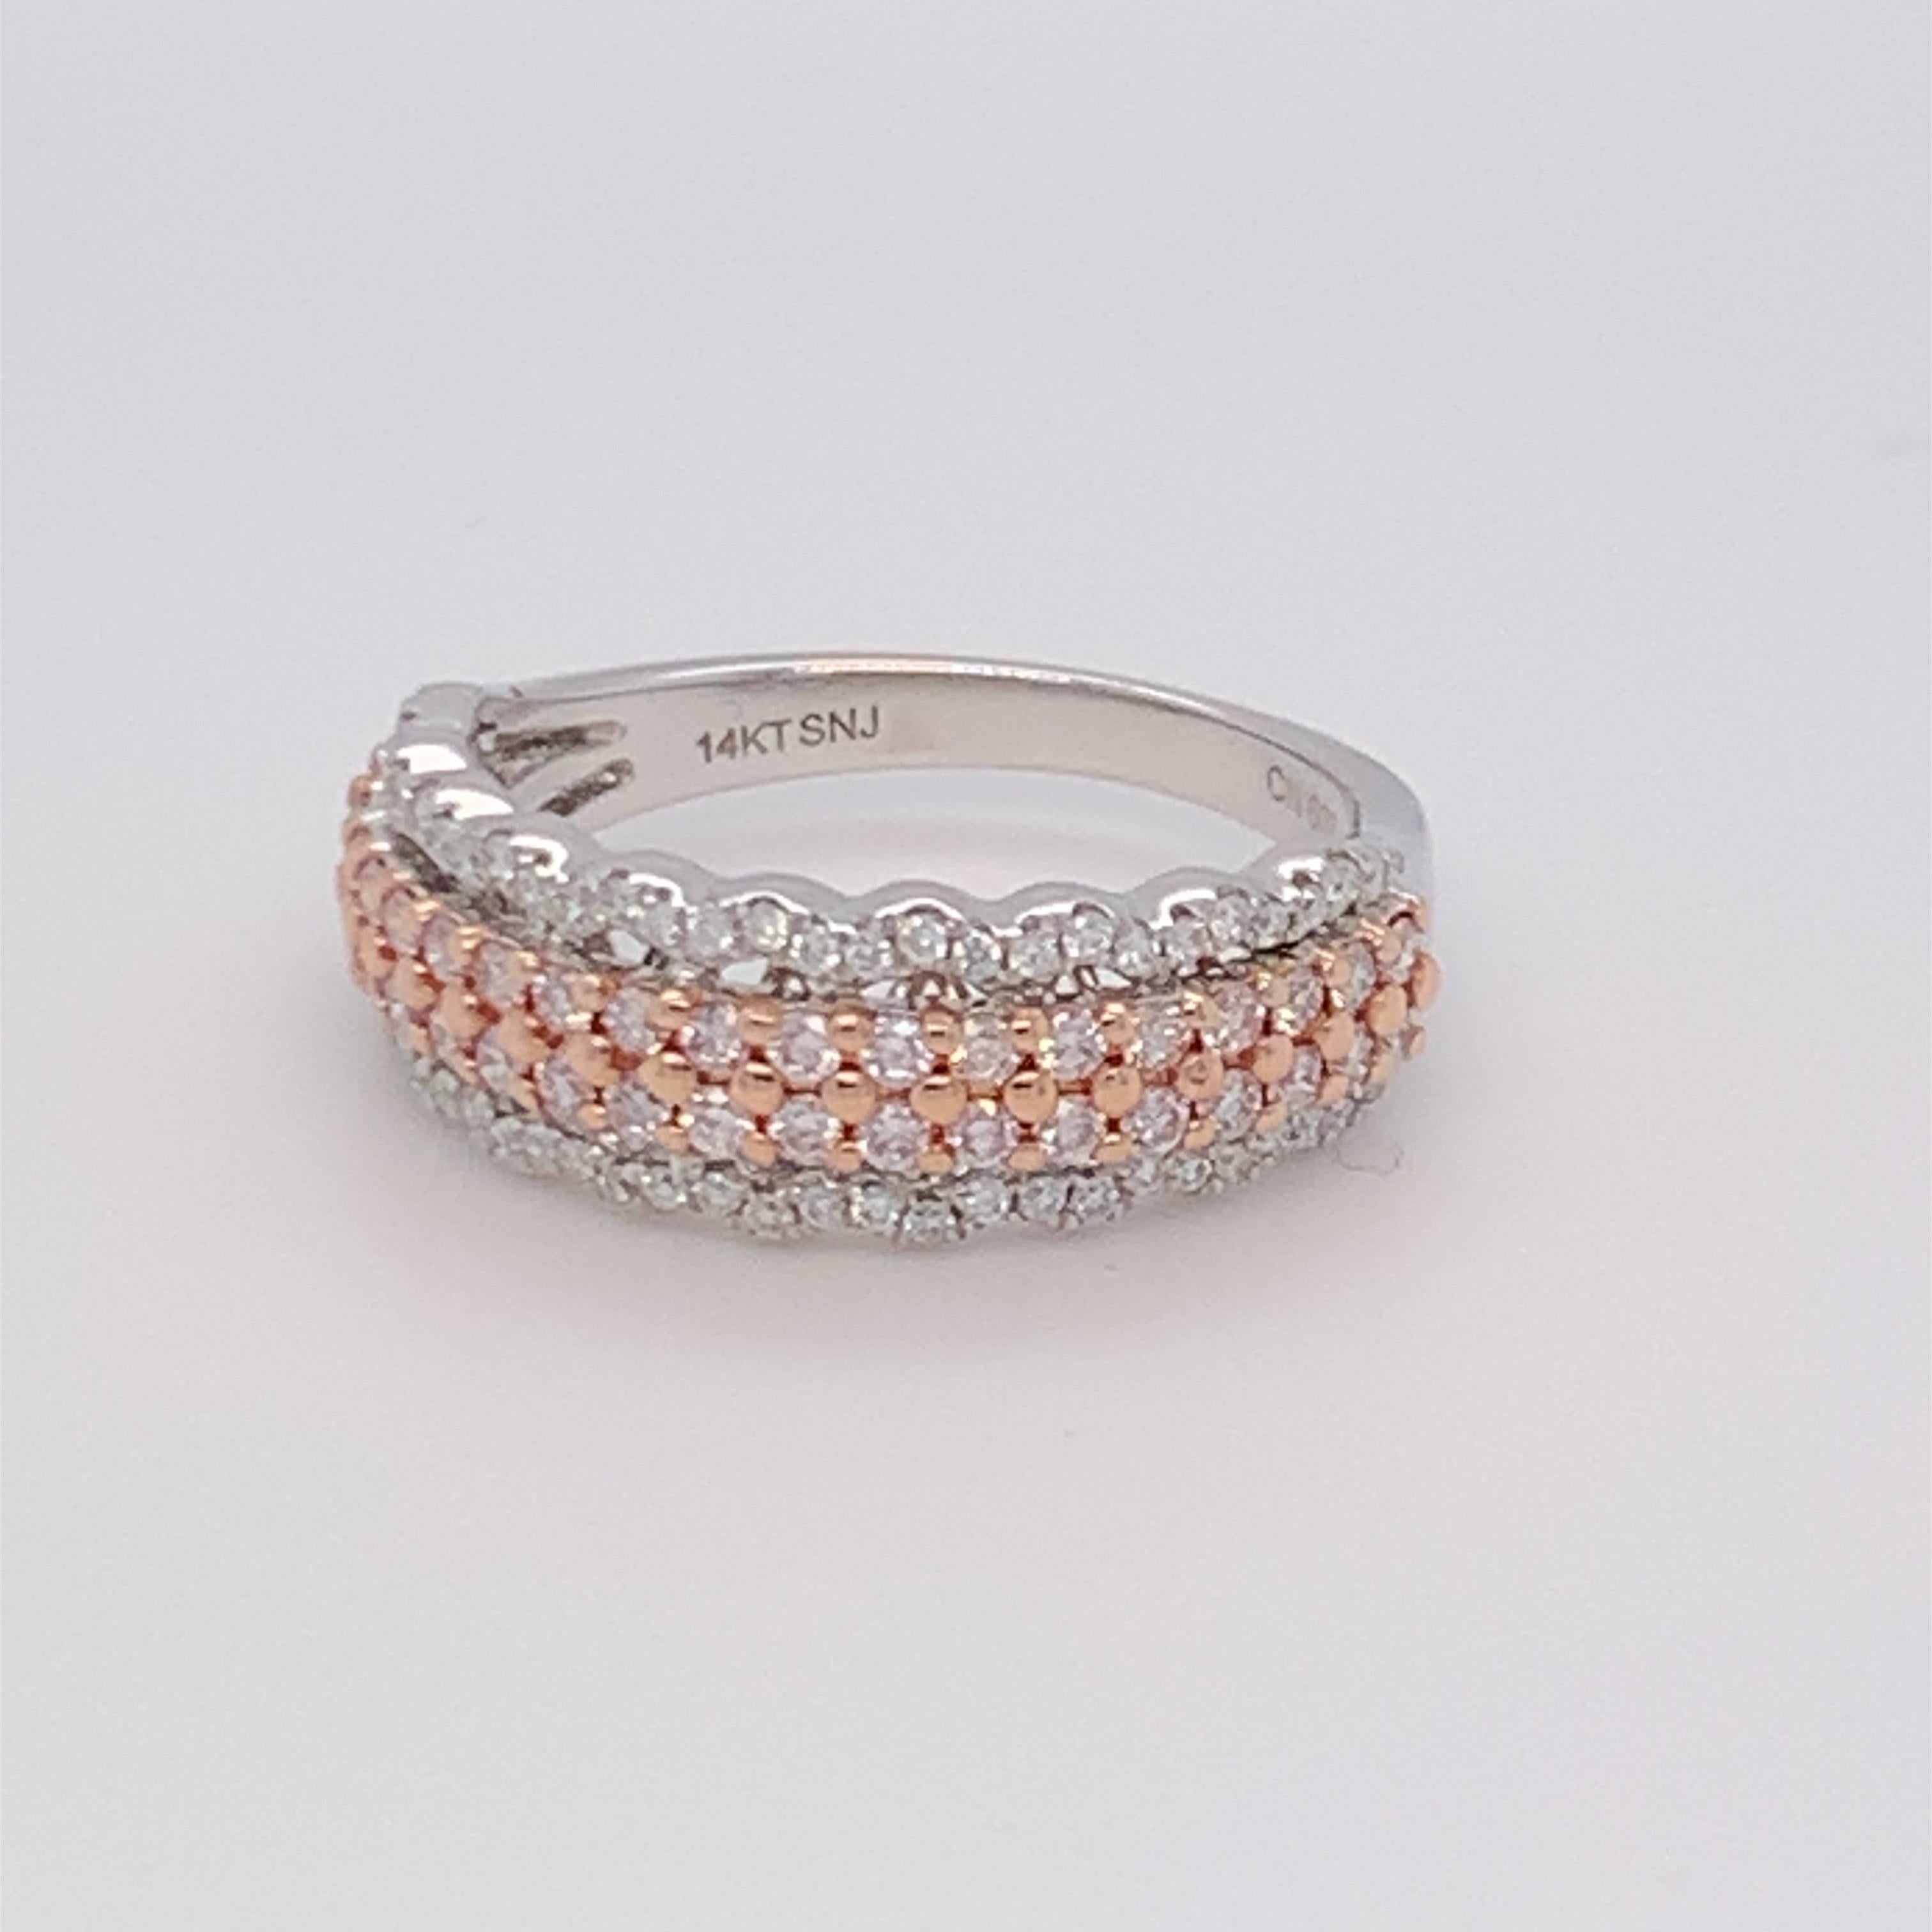 This stunning diamond ring has pink diamond band in between two rows of white diamonds. Carefully finished with hand by skilled craftsmen and mounted in 14K two tone gold.  
Pink Diamond: 0.46ct
White Diamond: 0.23ct
Gold: 14K Two Tone
Size: 7